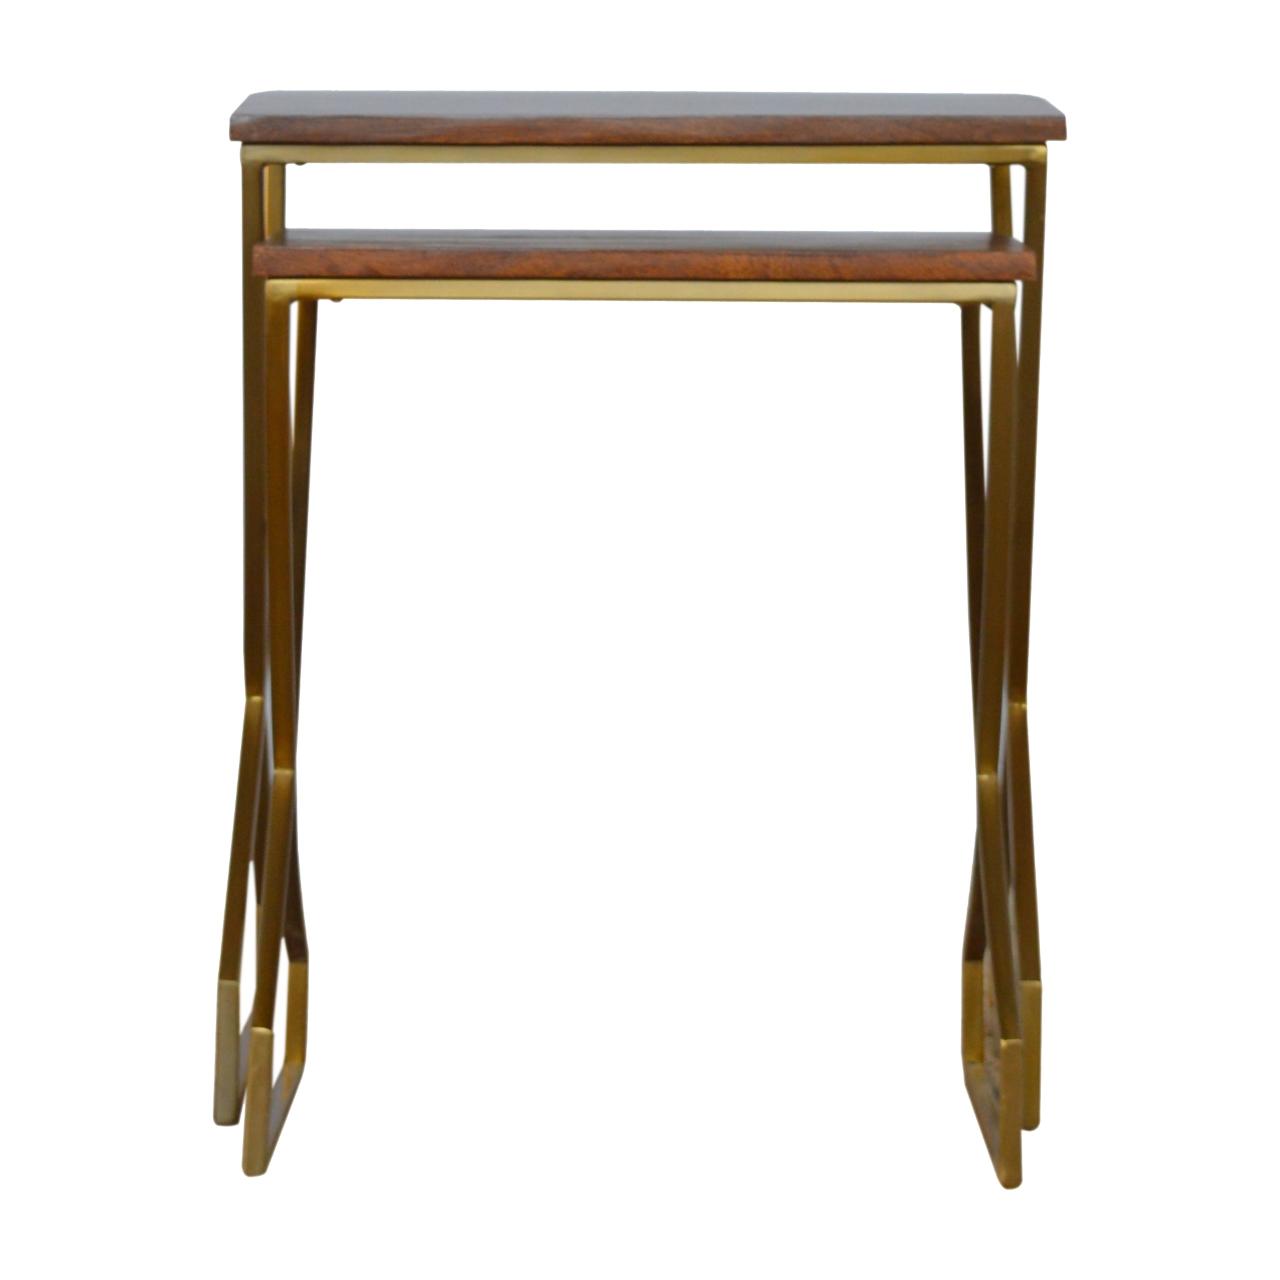 Set Of 2 Nesting Tables With Golden Base And Wooden Tops